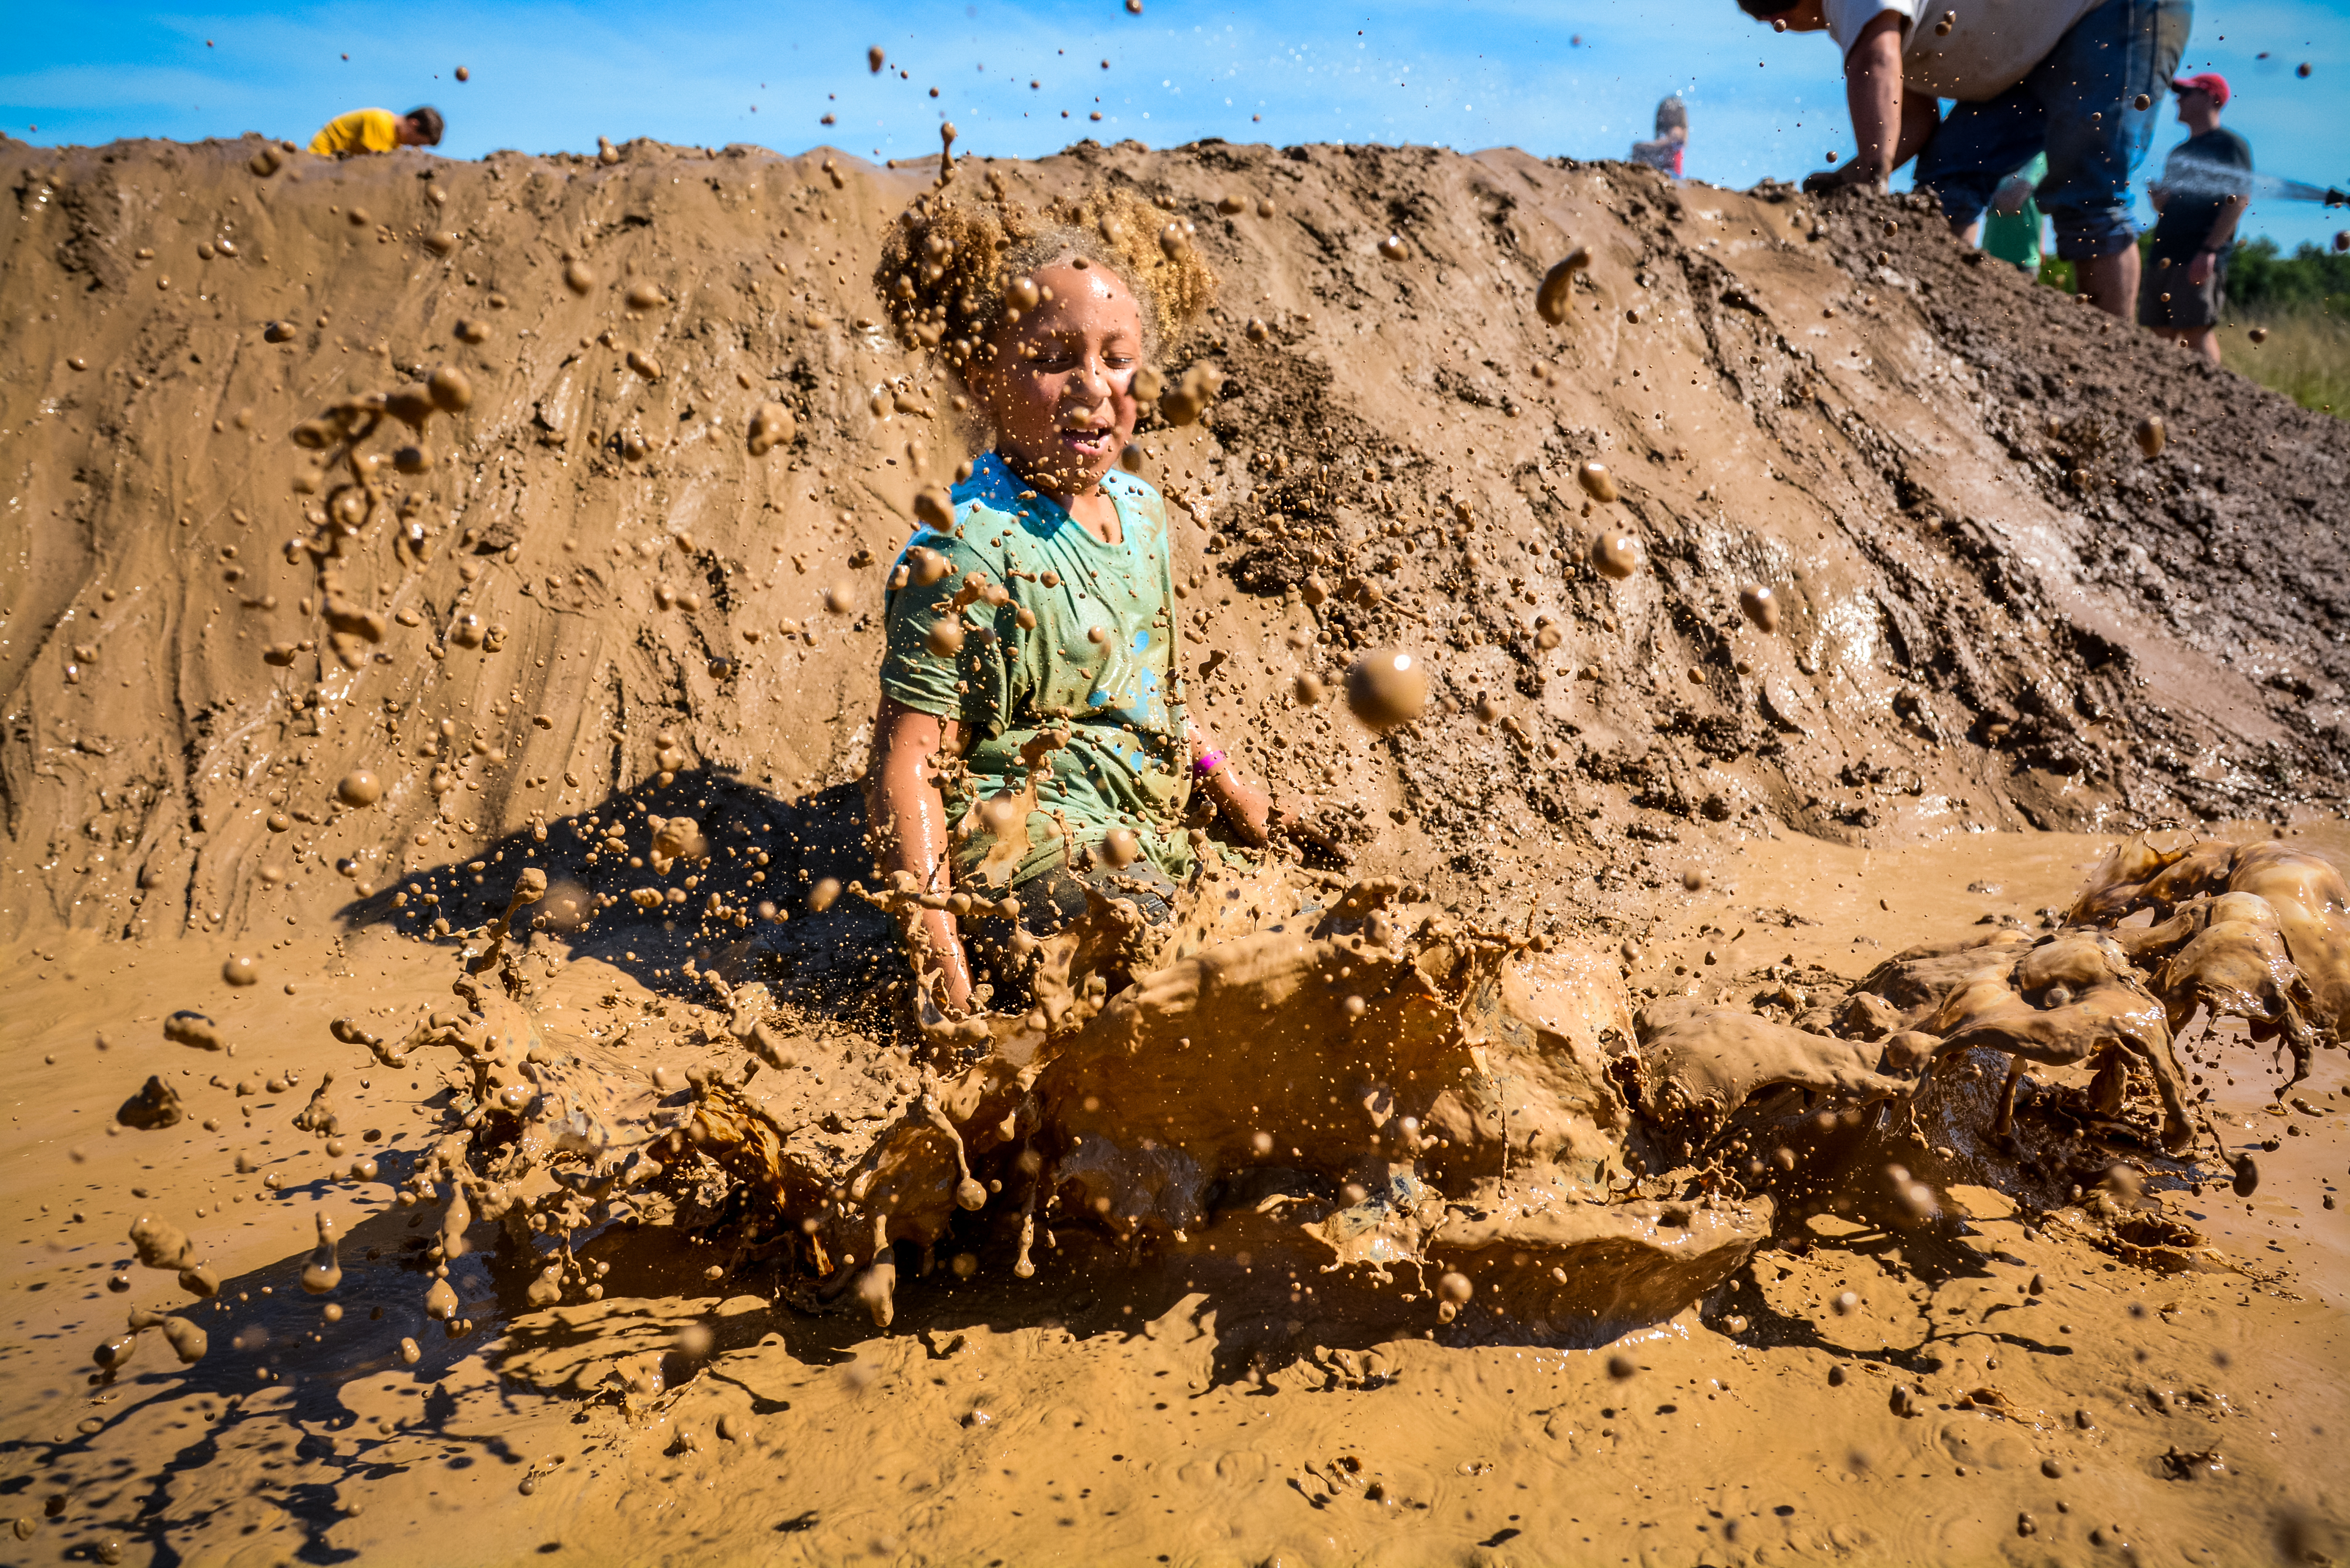 Local kids mud run continues to gain popularity